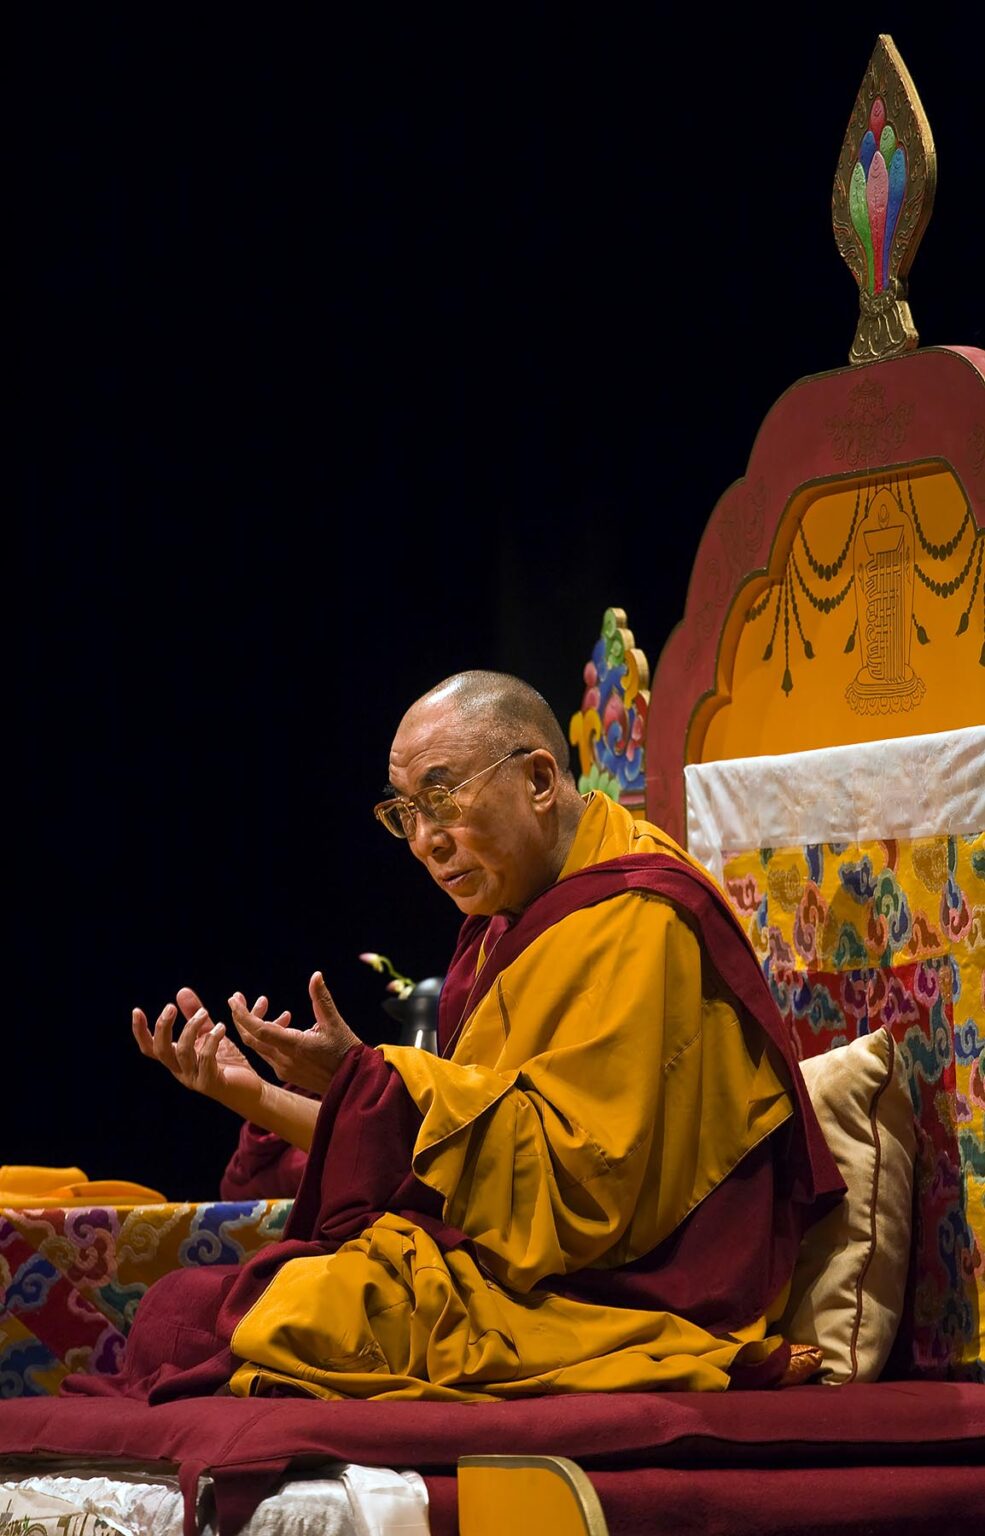 The 14th DALAI LAMA teaches ATISHA'S LAMP FOR THE PATH TO ENLIGHTENMENT in October 2007 sponsored by KUMBUM CHAMTSE LING and the TIBETAN CULTURAL CENTER, BLOOMINGTON, INDIANA